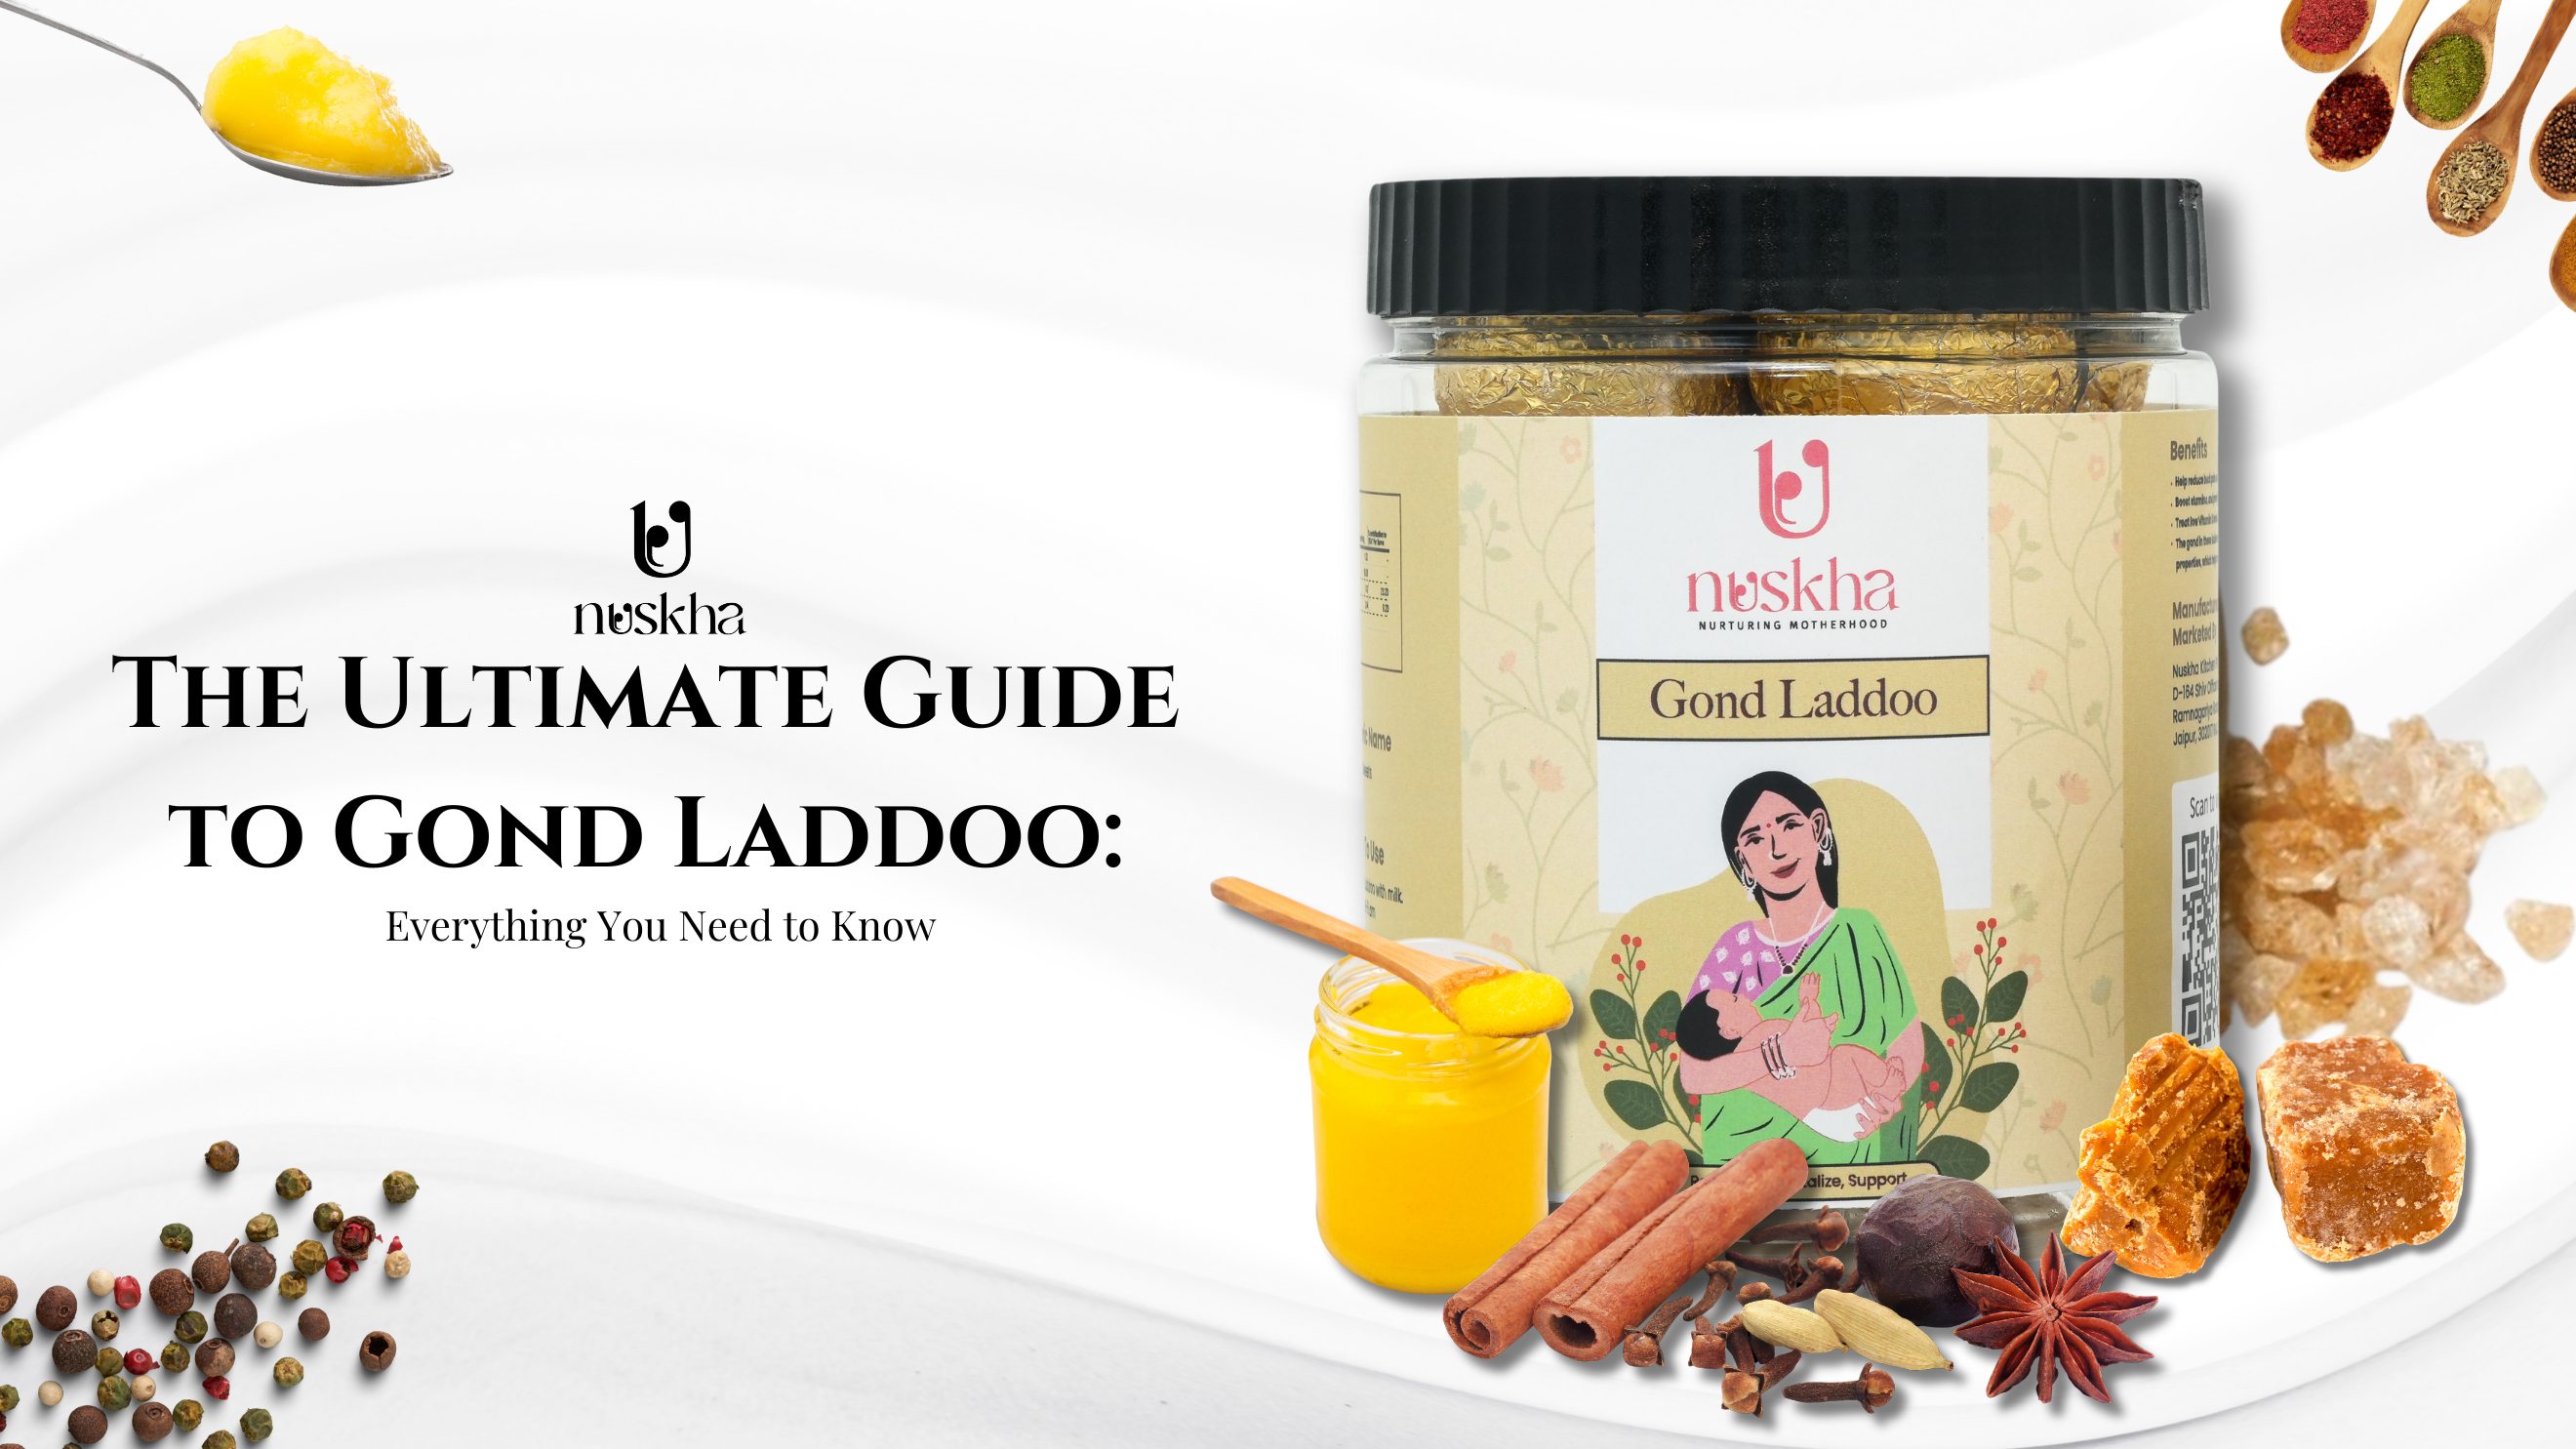 The Ultimate Guide to Gond Laddoo: Everything You Need to Know"